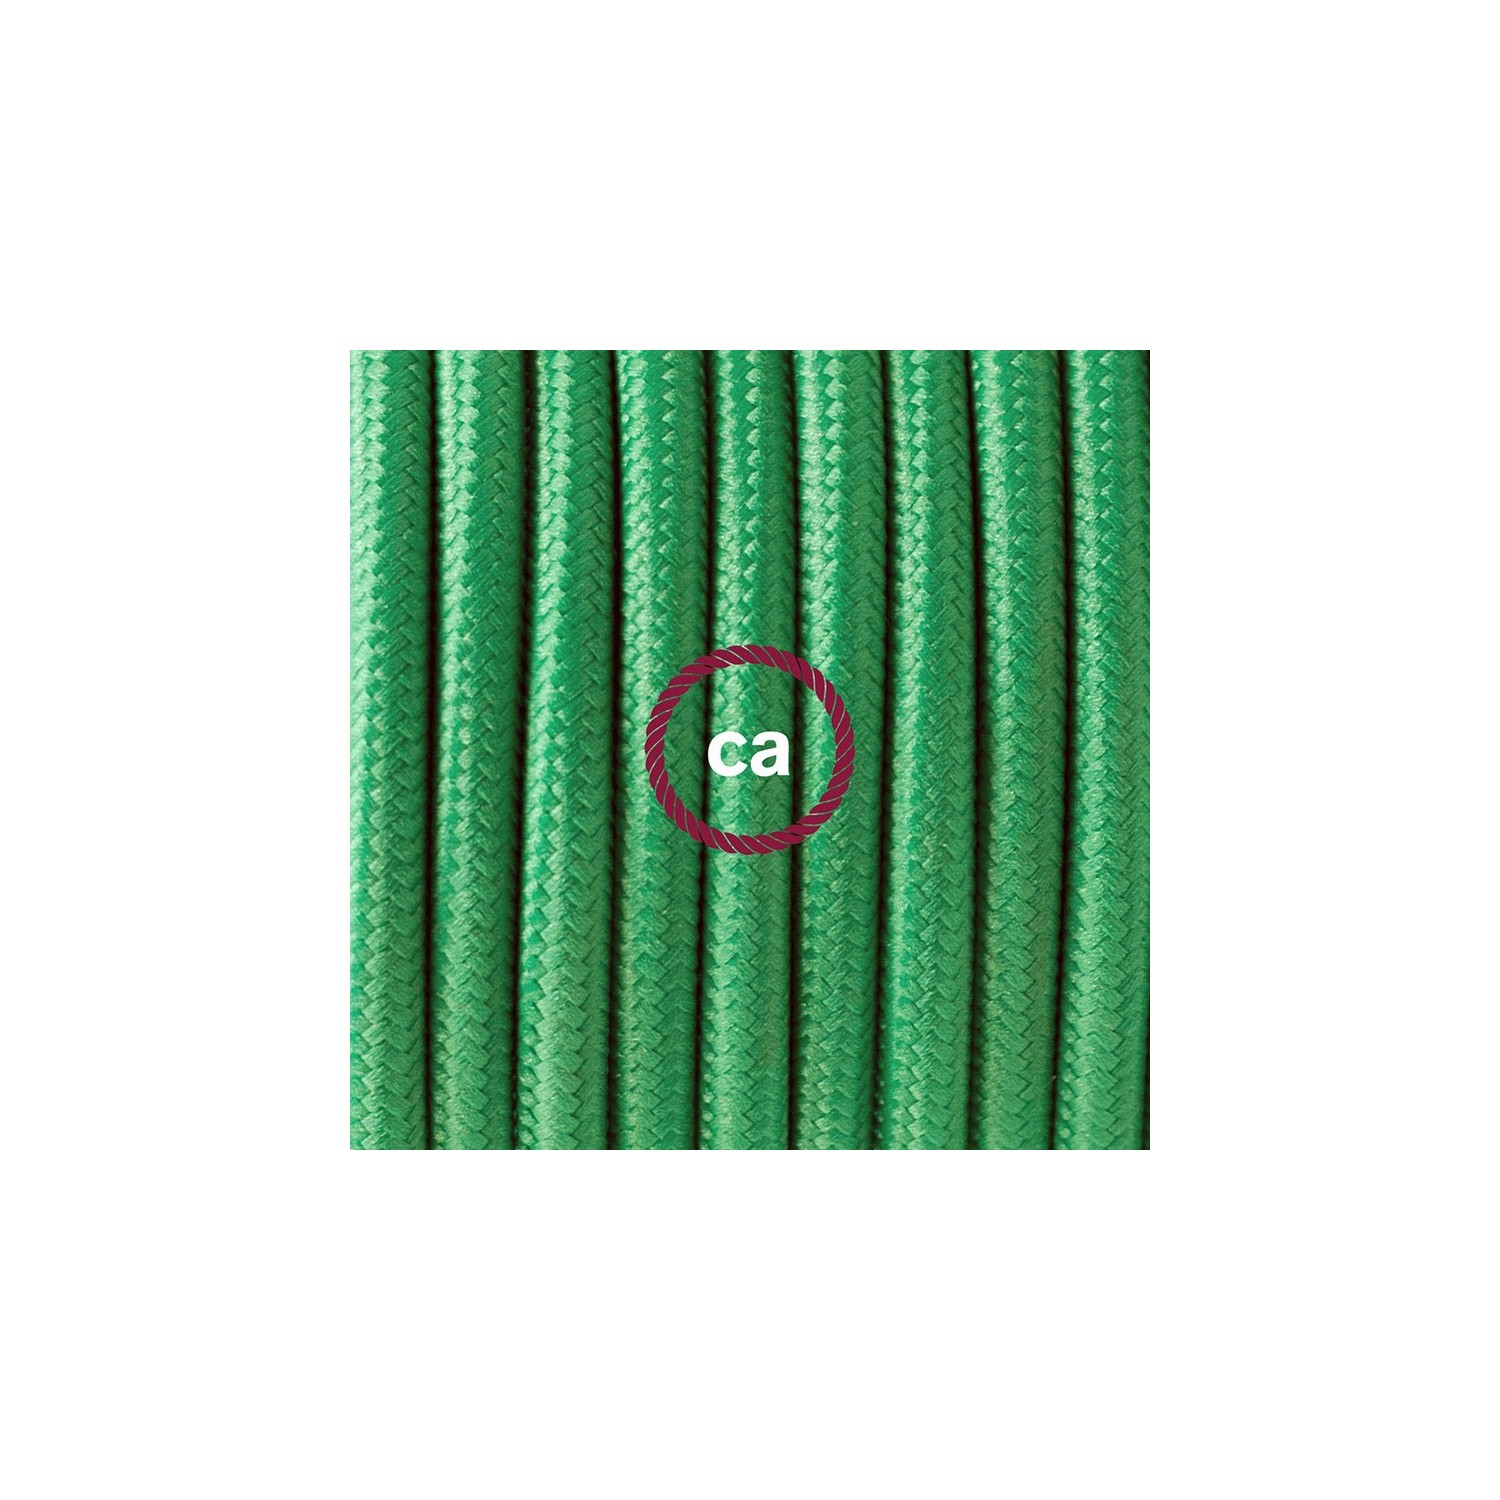 Create your RM06 Green Rayon Snake and bring the light wherever you want.